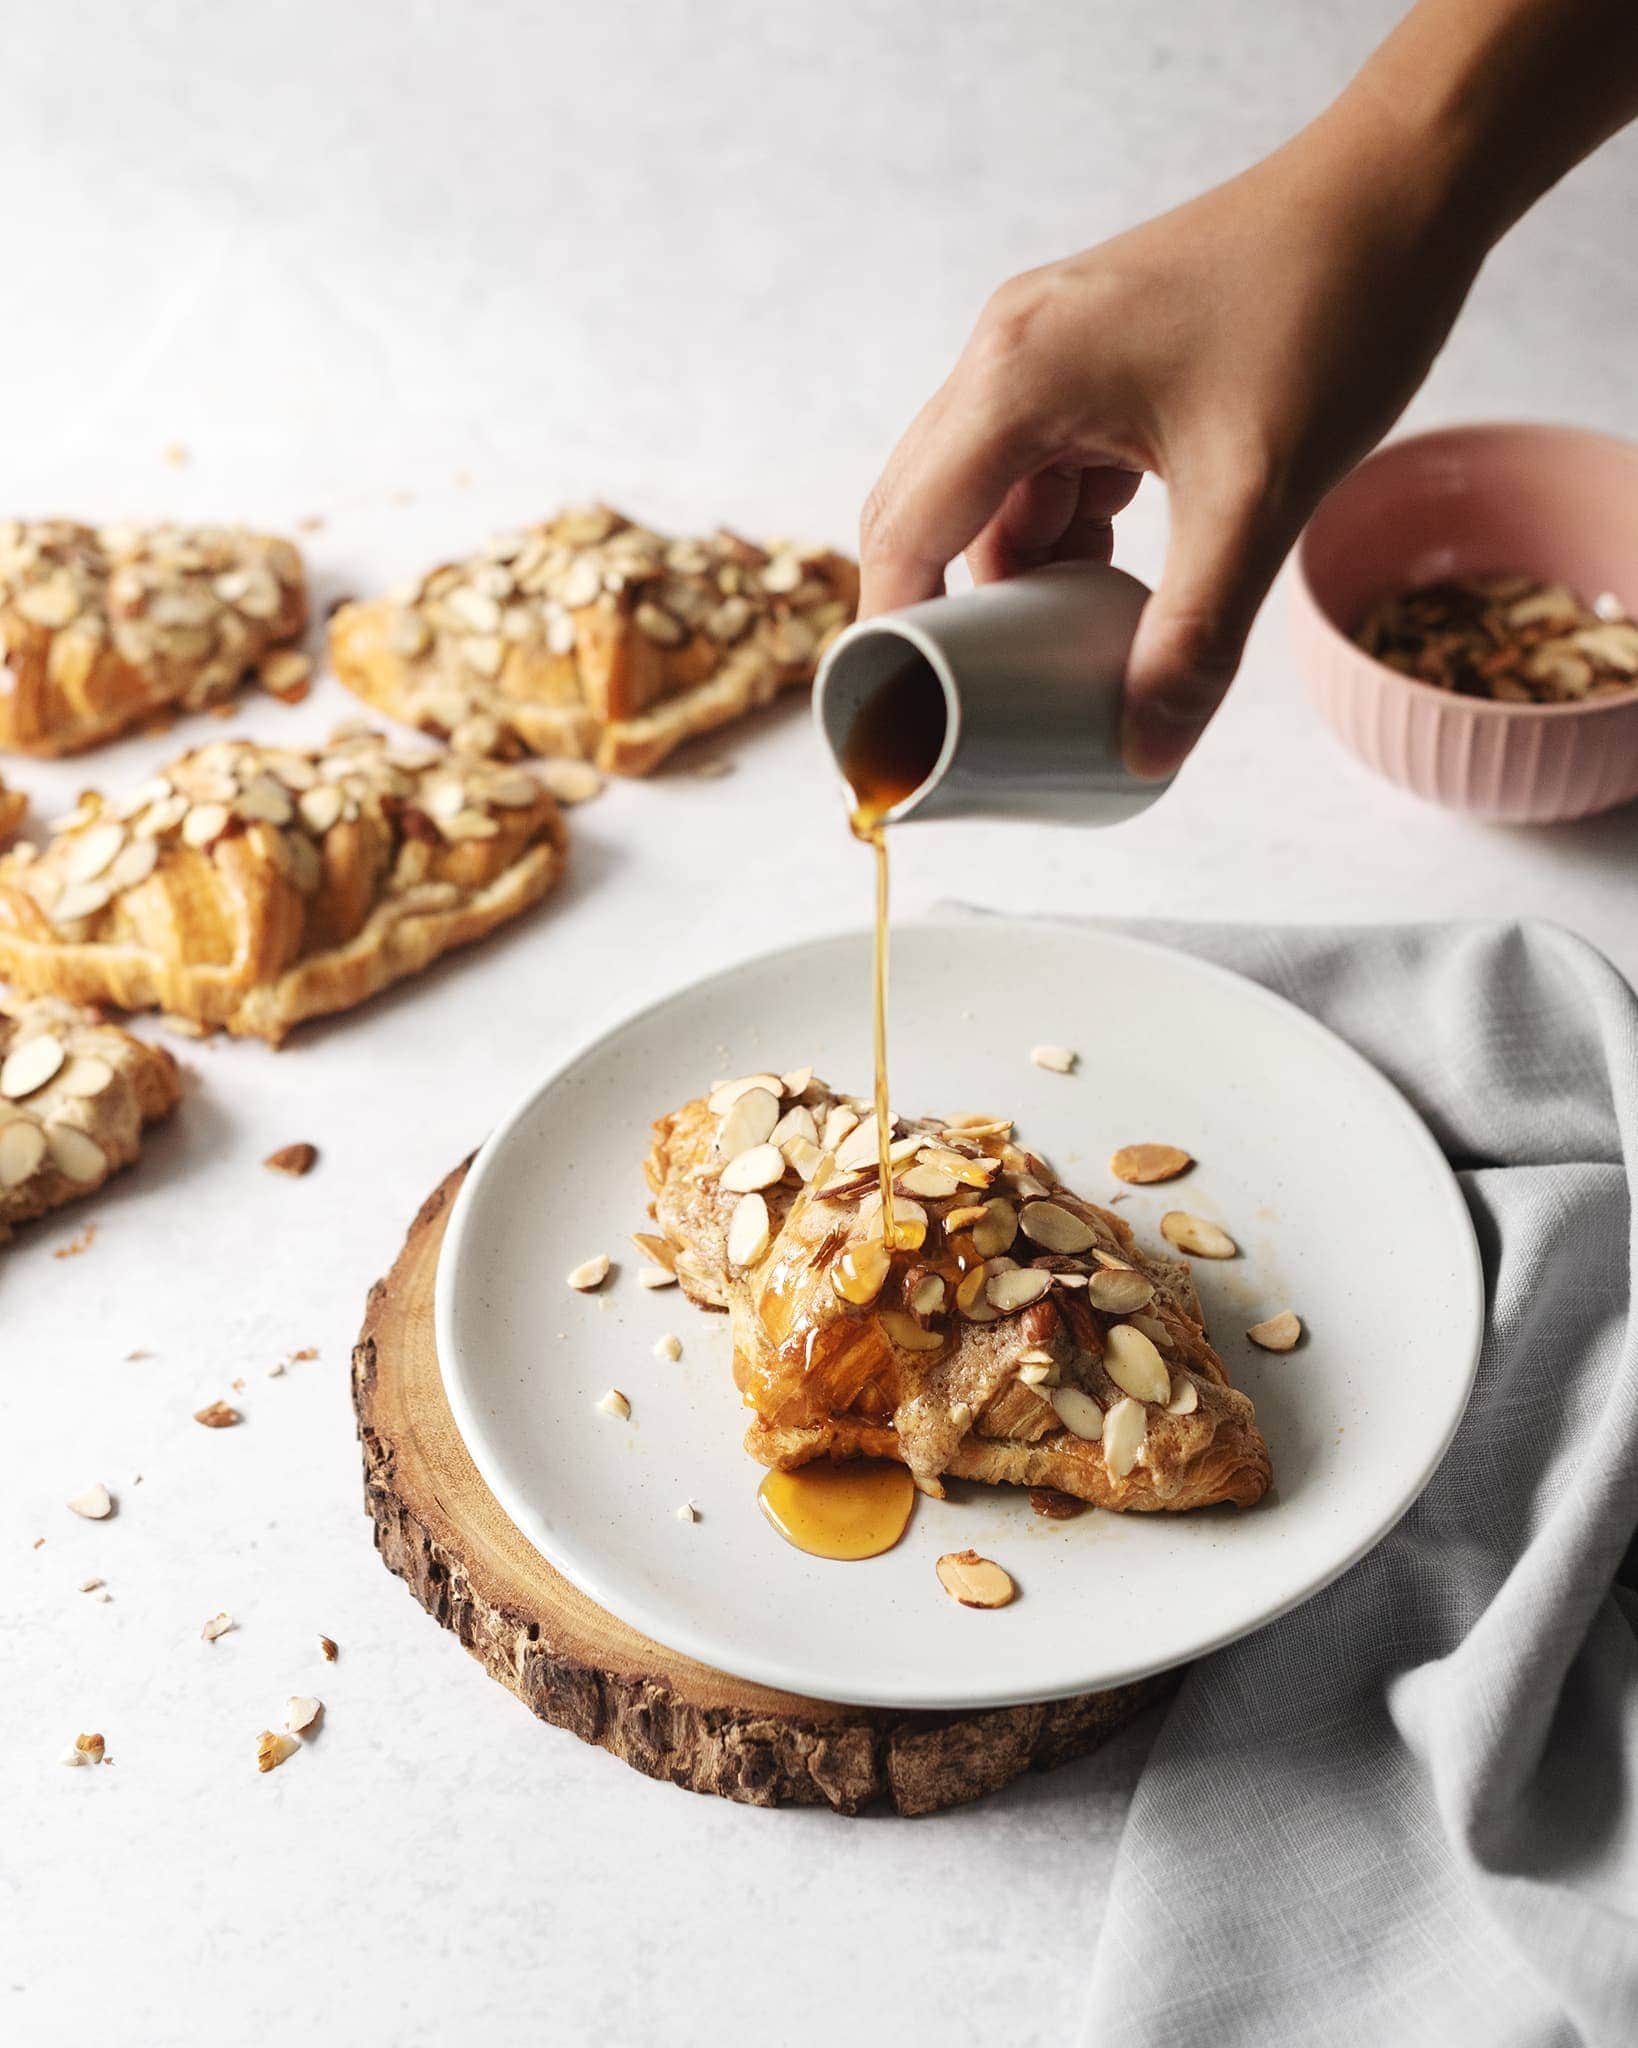 Hand pouring earl grey simple syrup on top of an almond croissant on a plate